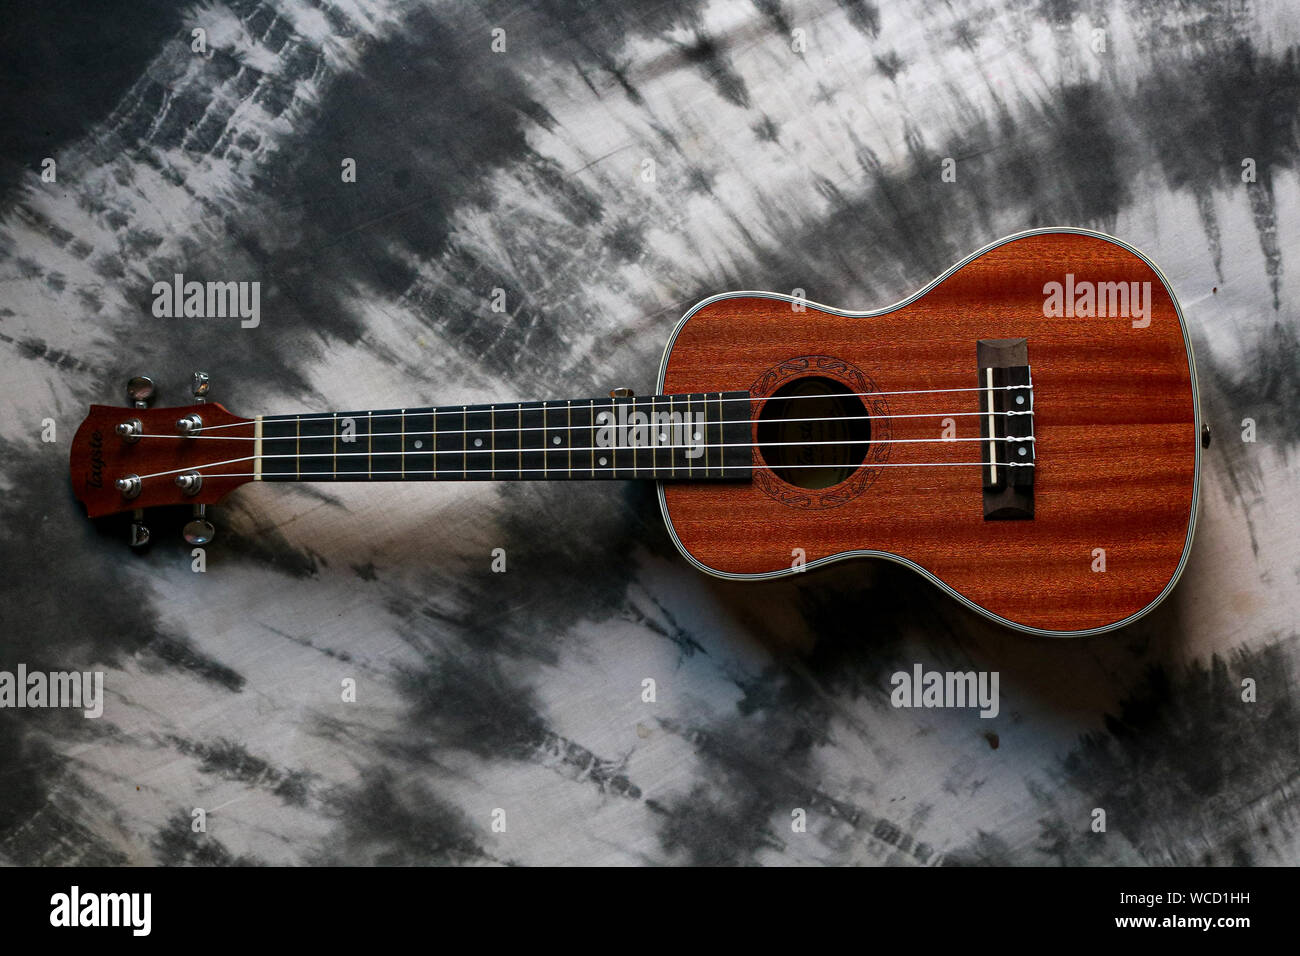 Ukulele on black abstract background. Headstock and fret of ukulele parts. Copy space for text. Concept of Hawaiian musical instruments and music love Stock Photo